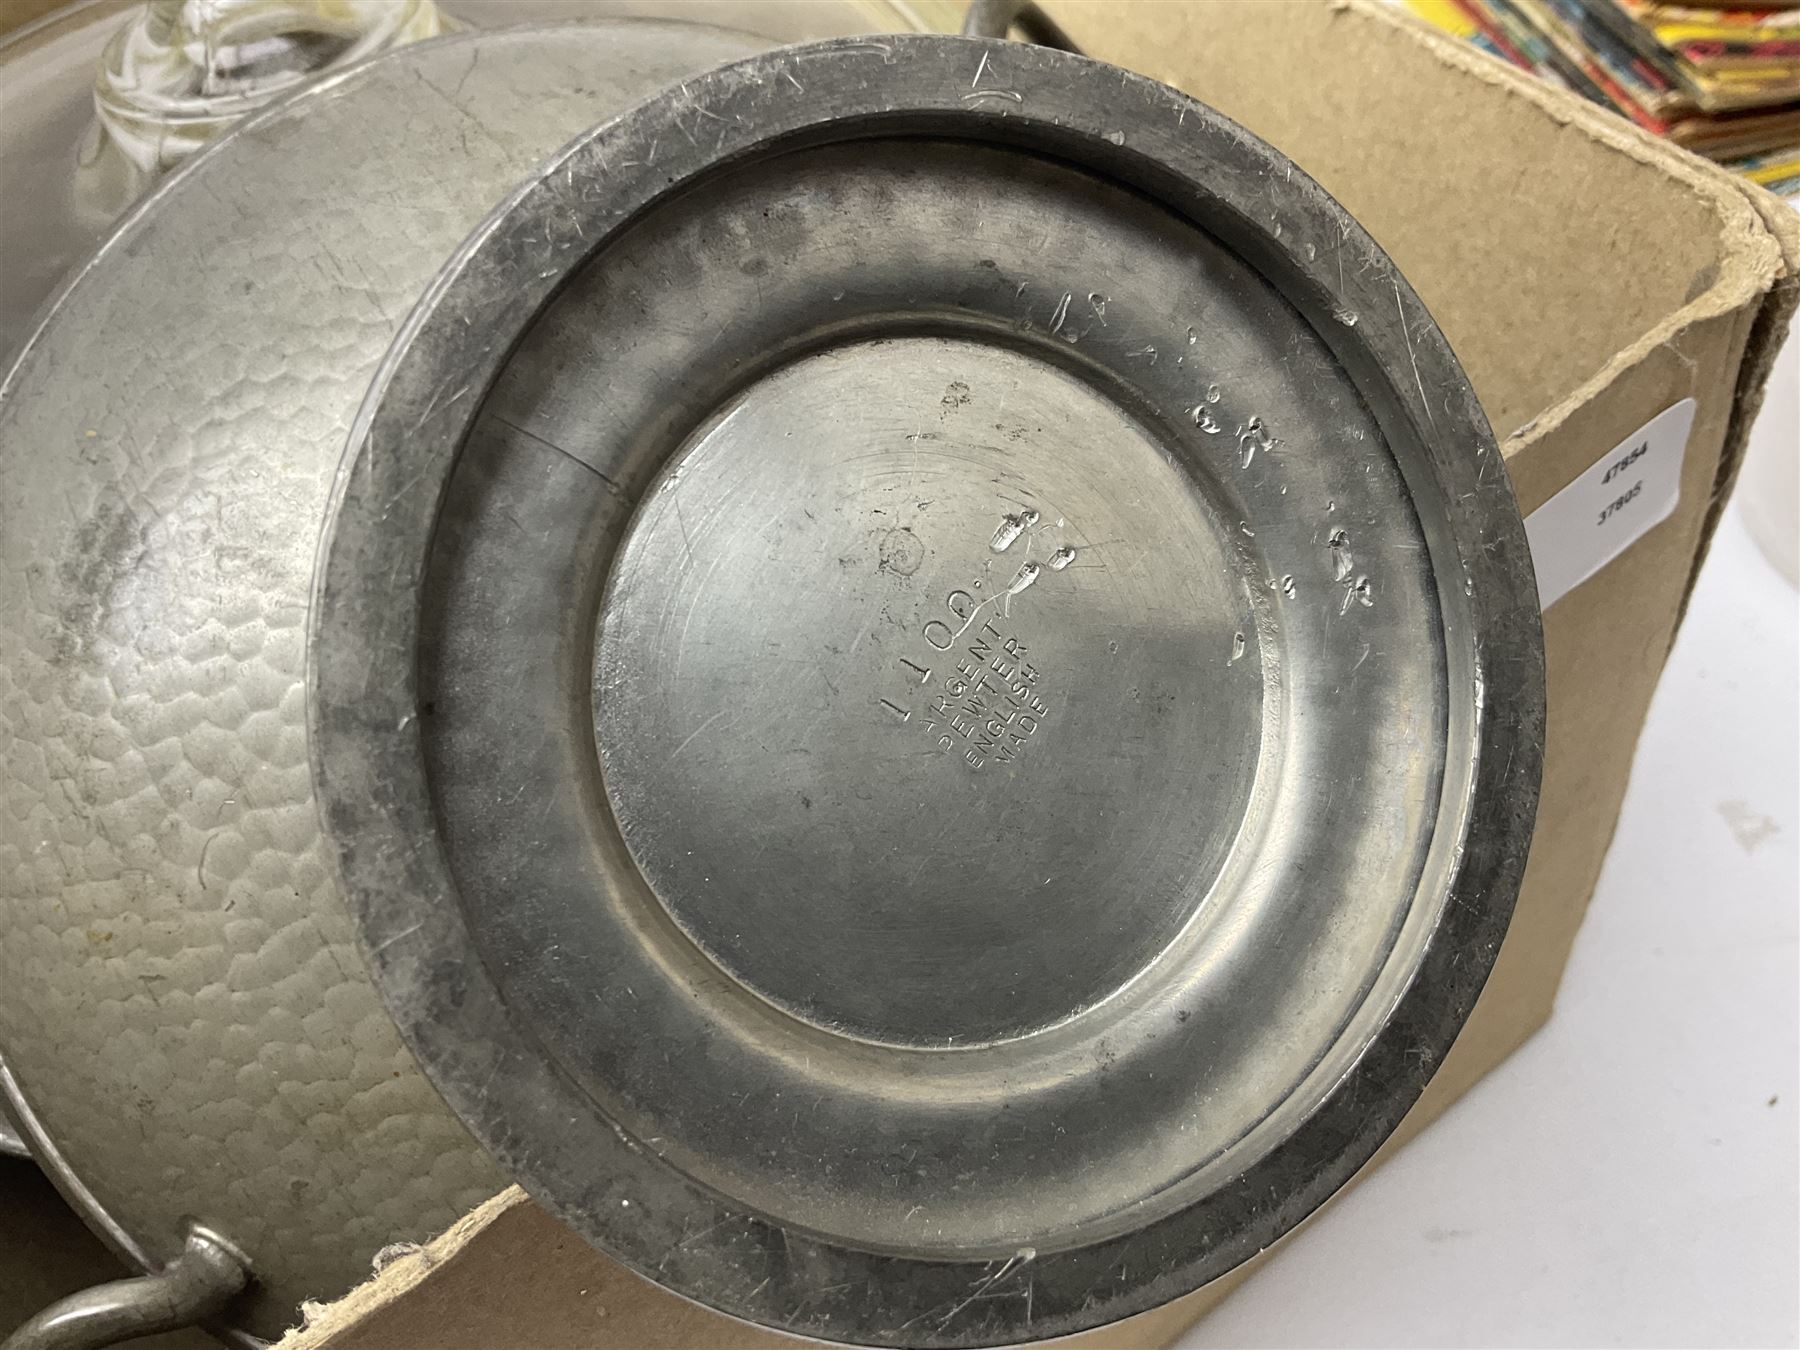 Argent pewter hammered twin handled dish - Image 9 of 9